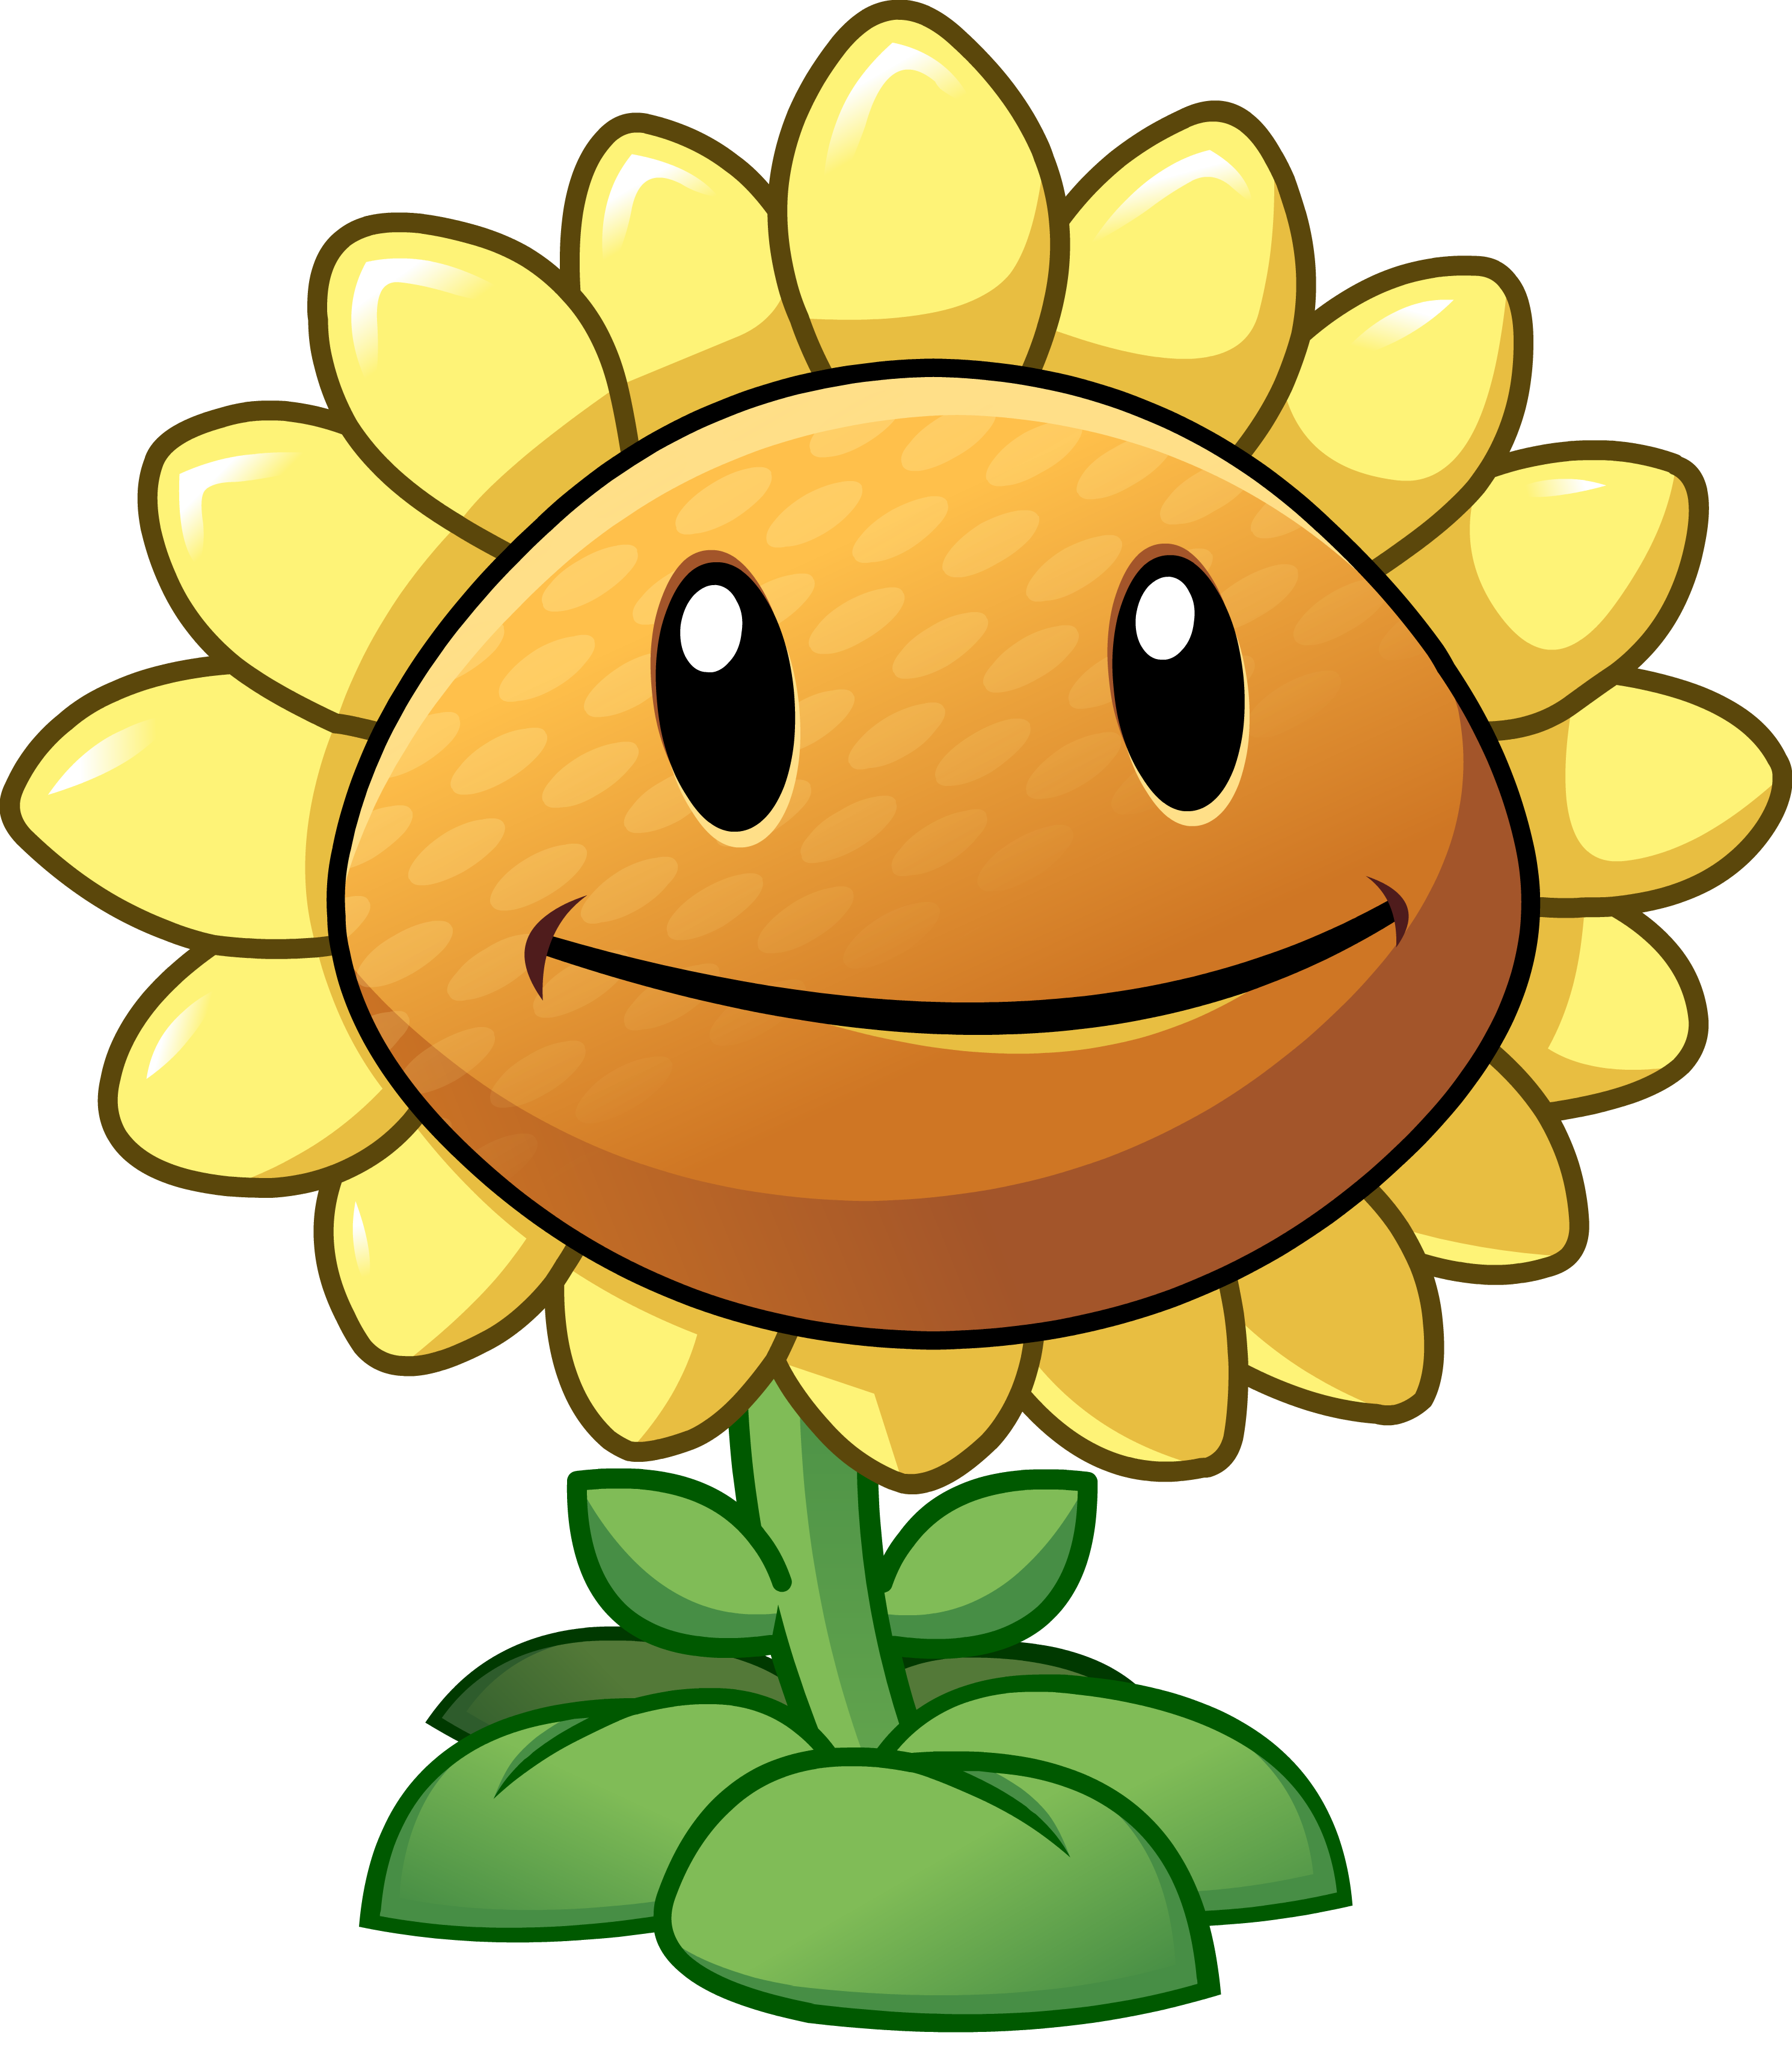 sunflower hd zombies plants vs wiki file mime size